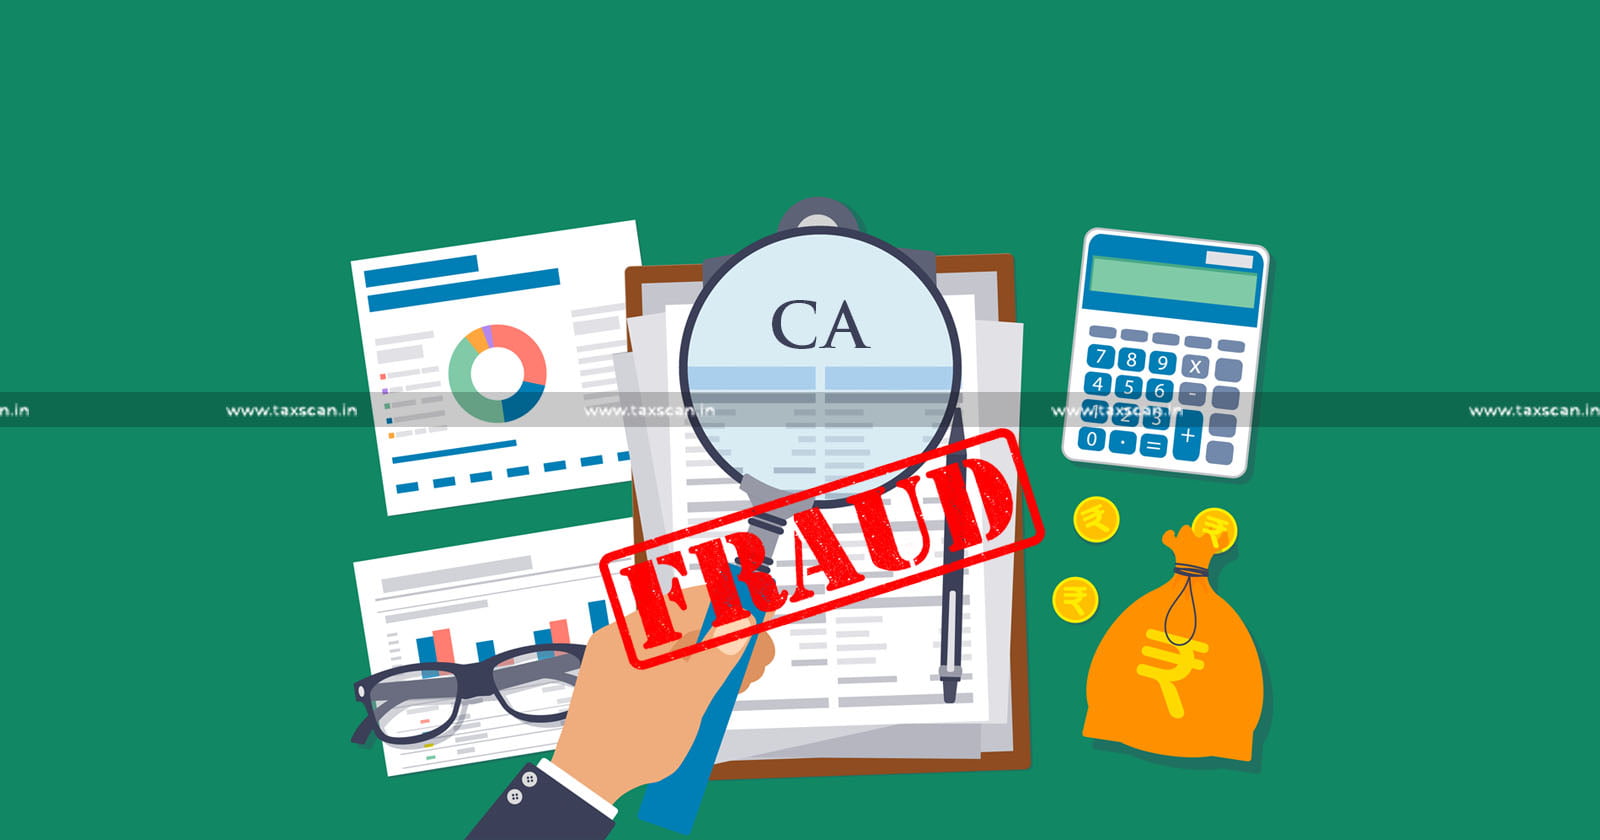 CA - Connivance of CA - fraudulently file ITR - CA to fraudulently file ITR - ITR - file ITR without consent of Assessee - Assessee - Taxscan